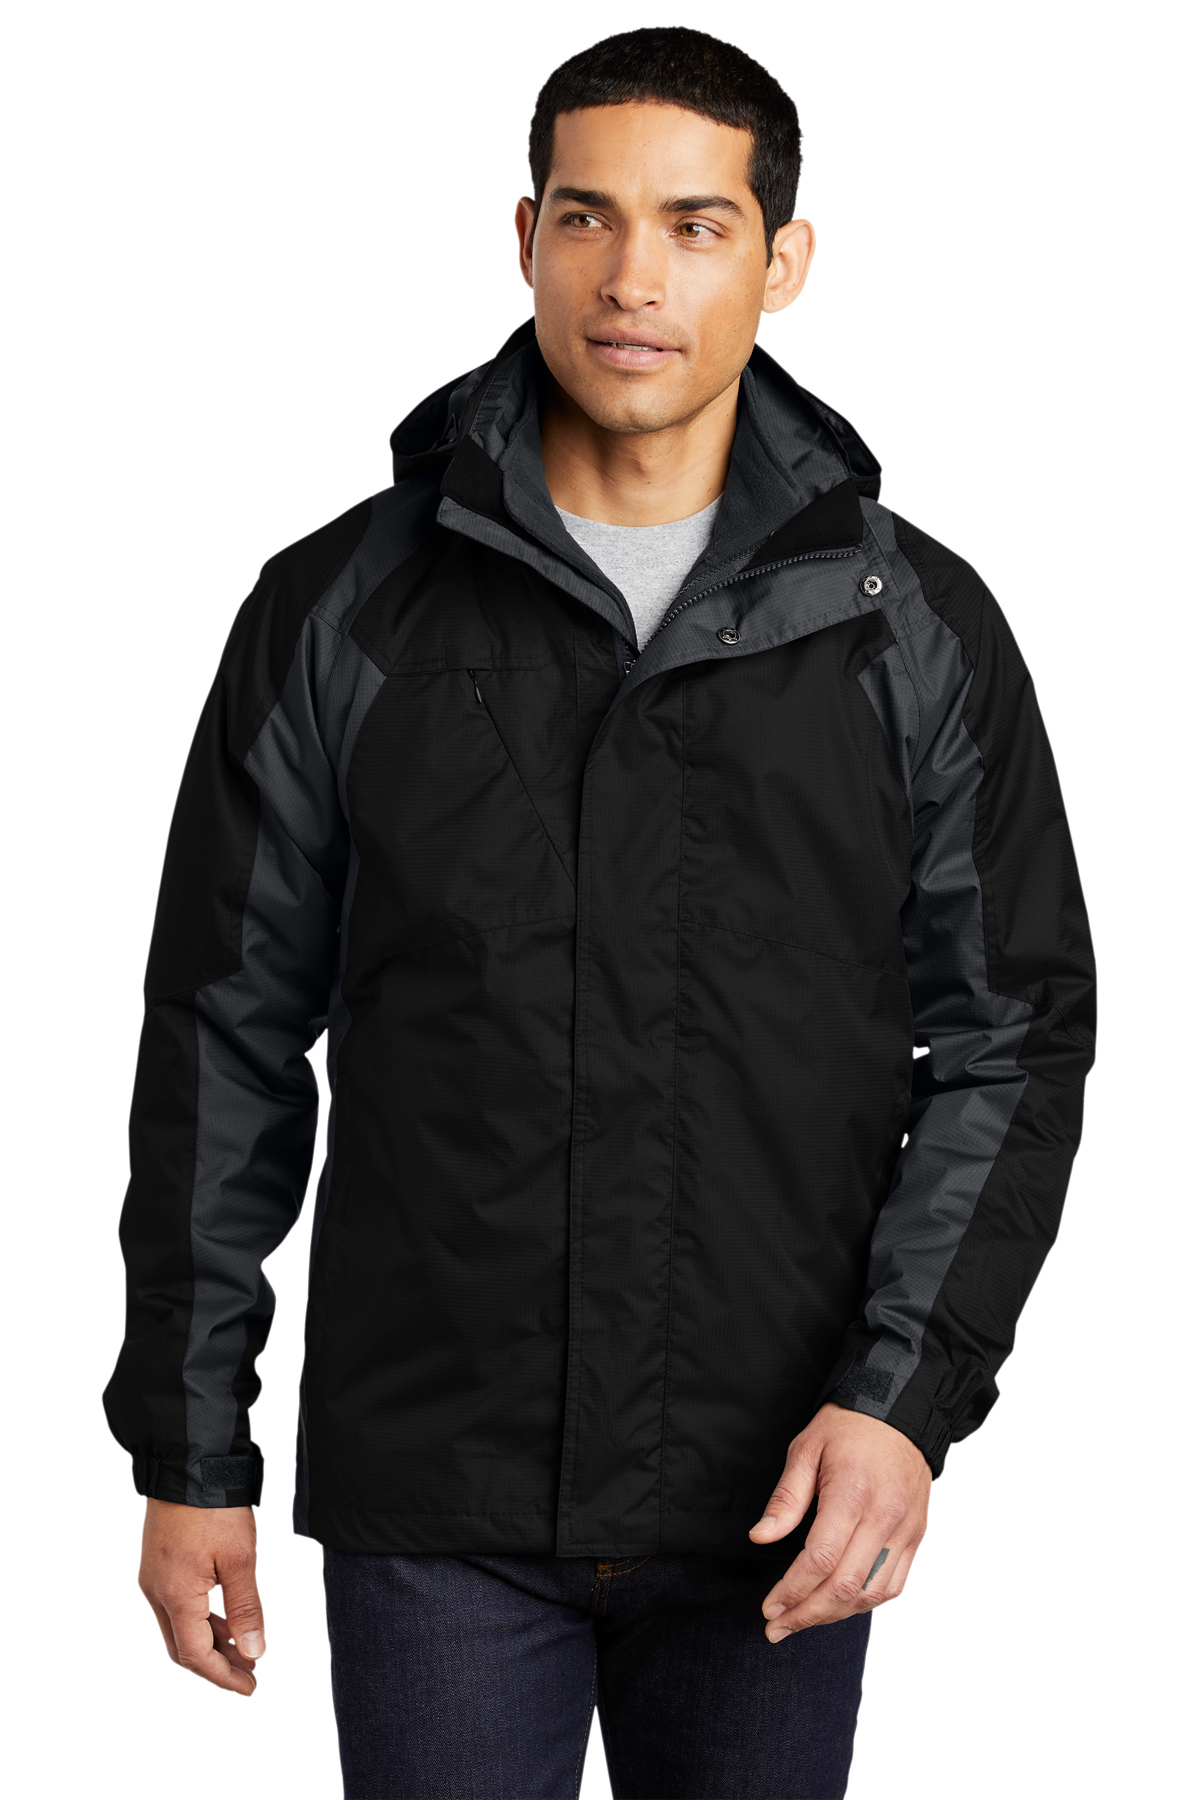 Port Authority Ranger 3-in-1 Jacket | Product | Port Authority